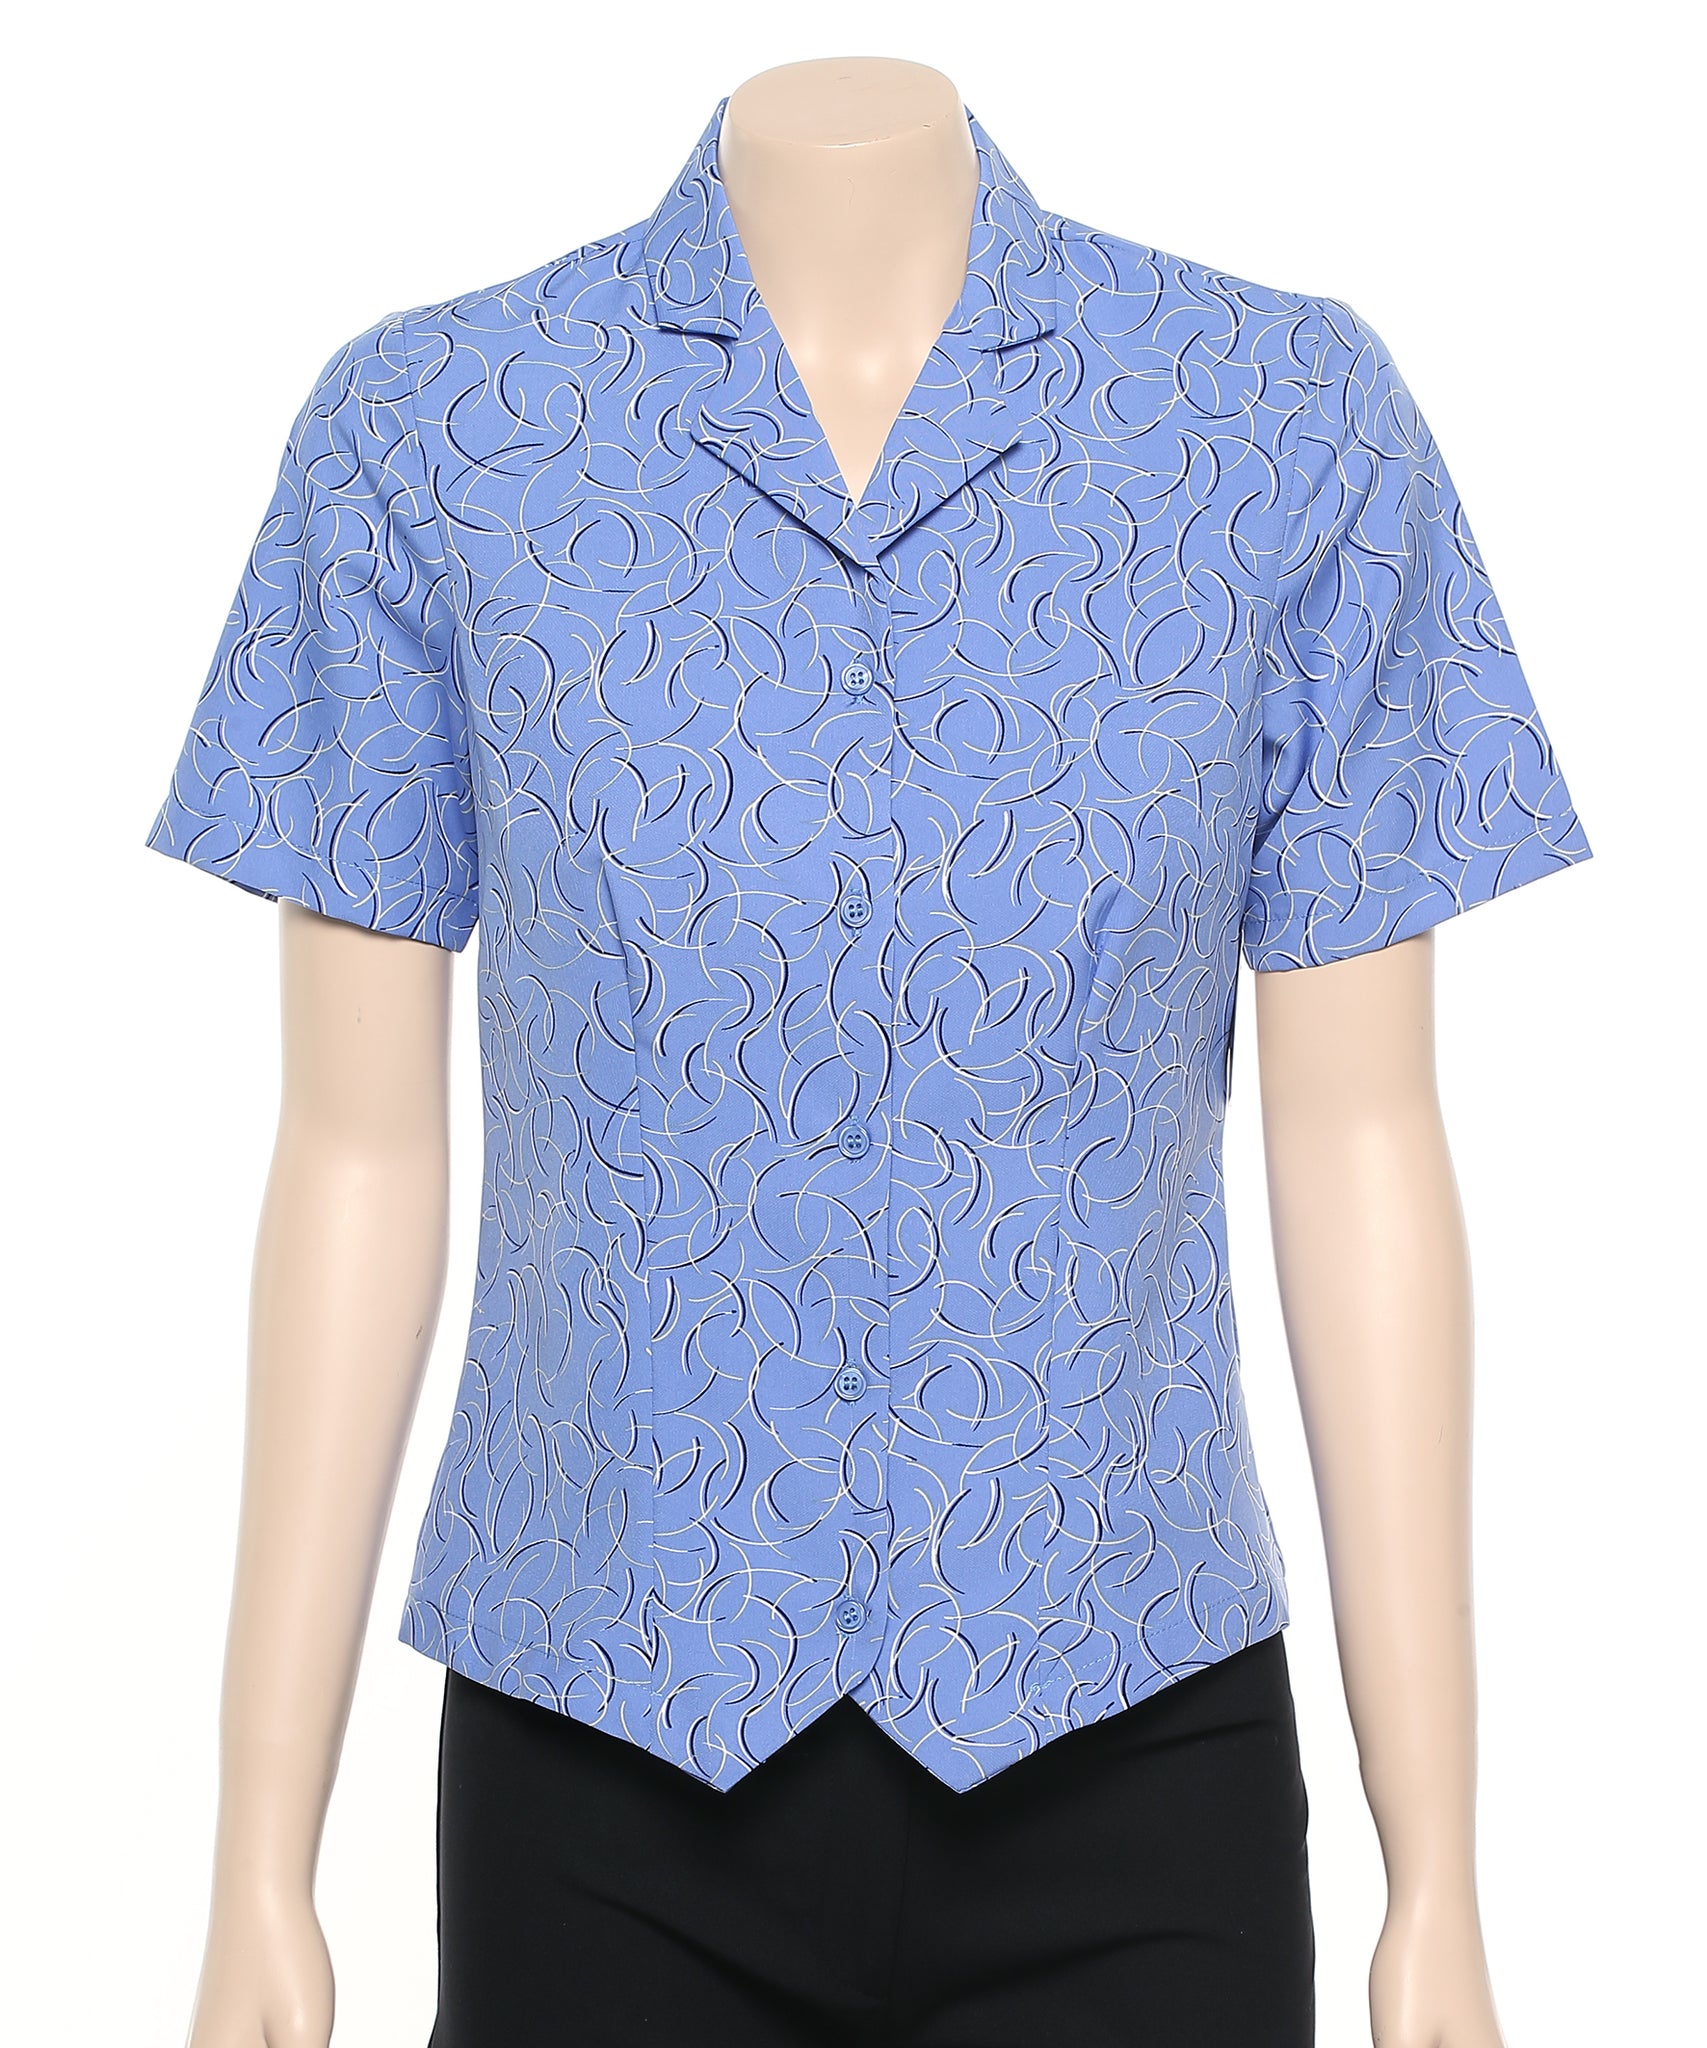 222-BR-PHE Print 51 Ladies fitted shirt